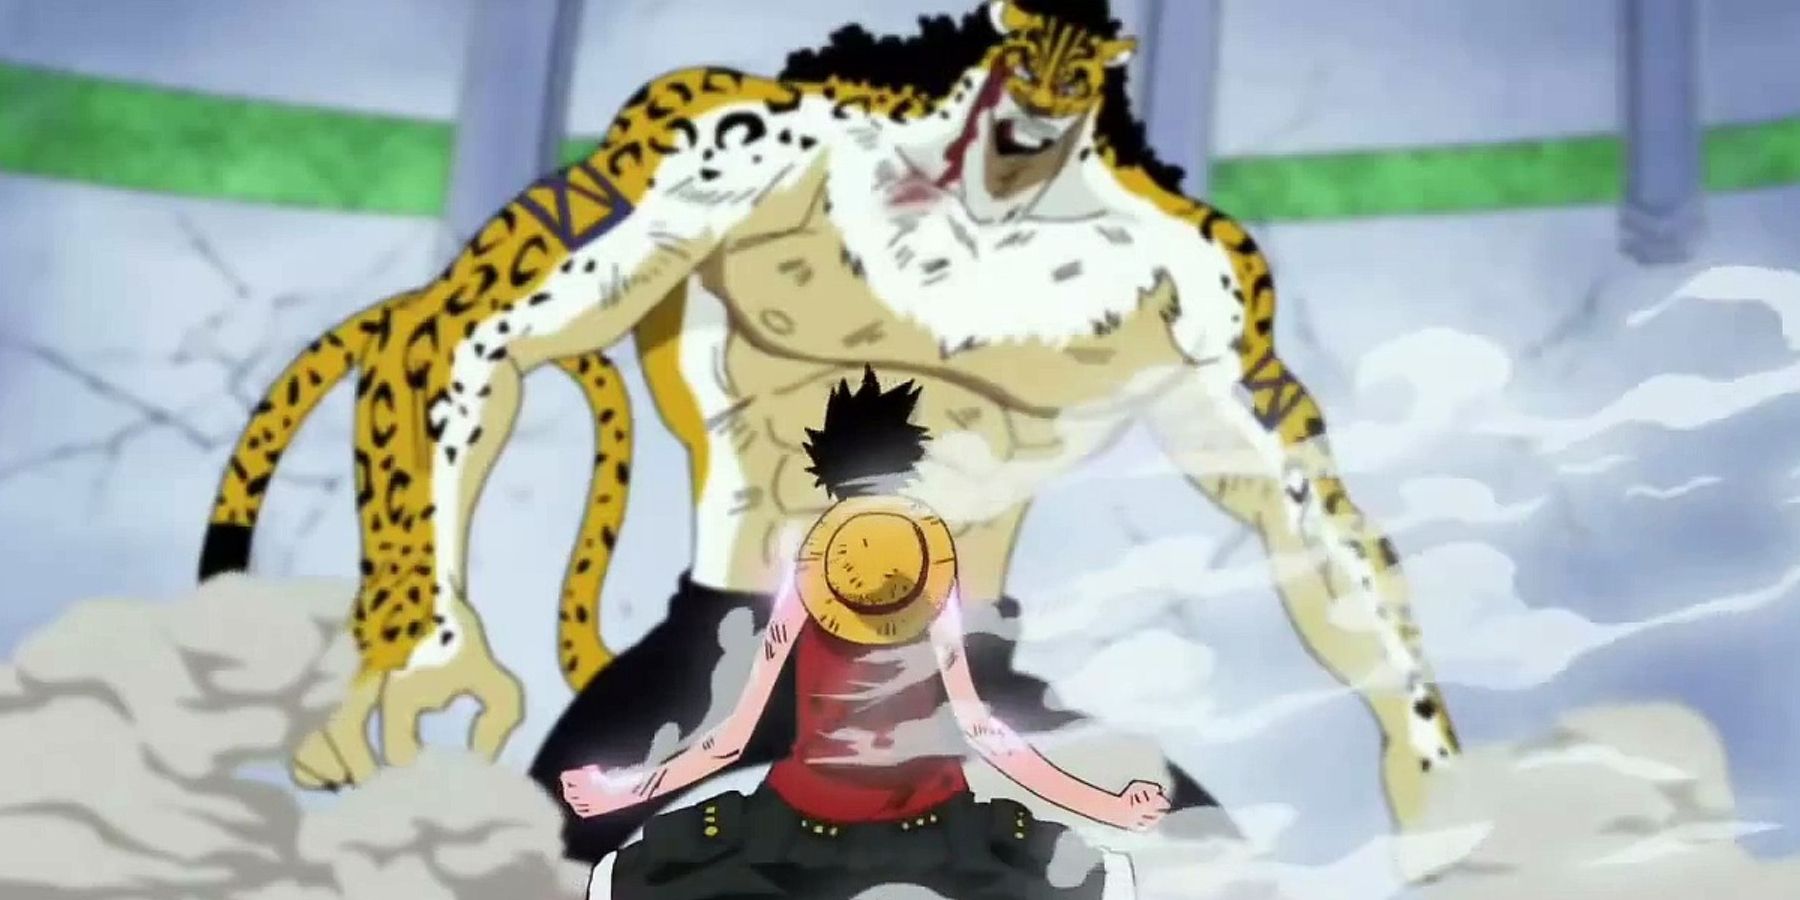 Monkey D. Luffy uses Gear 2nd against Rob Lucci in One Piece's Enies Lobby Arc